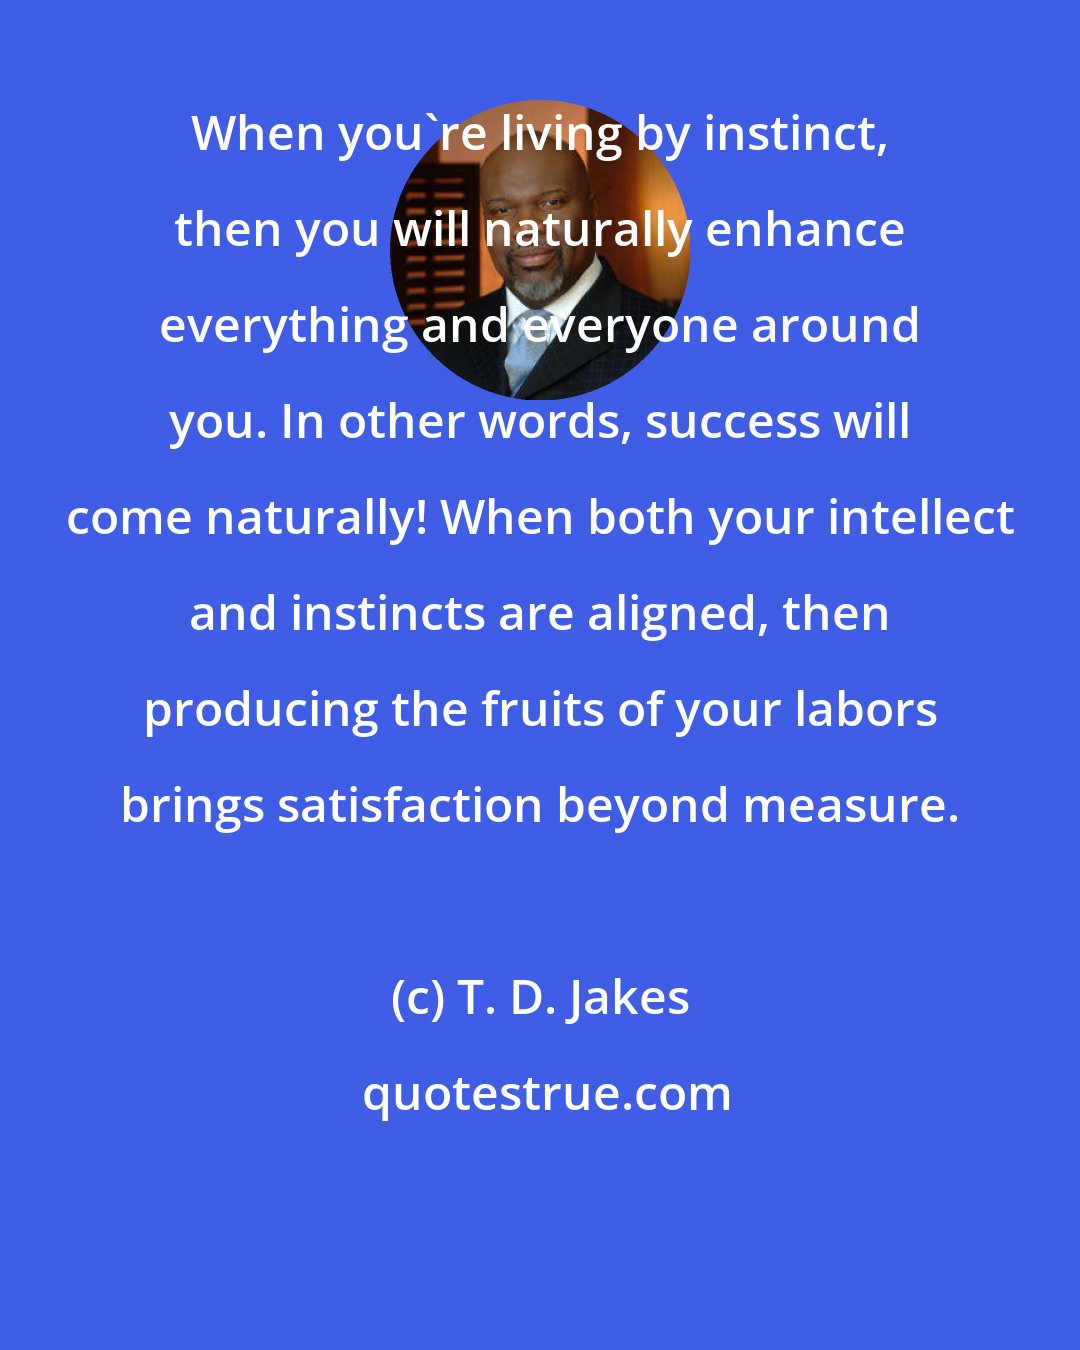 T. D. Jakes: When you're living by instinct, then you will naturally enhance everything and everyone around you. In other words, success will come naturally! When both your intellect and instincts are aligned, then producing the fruits of your labors brings satisfaction beyond measure.